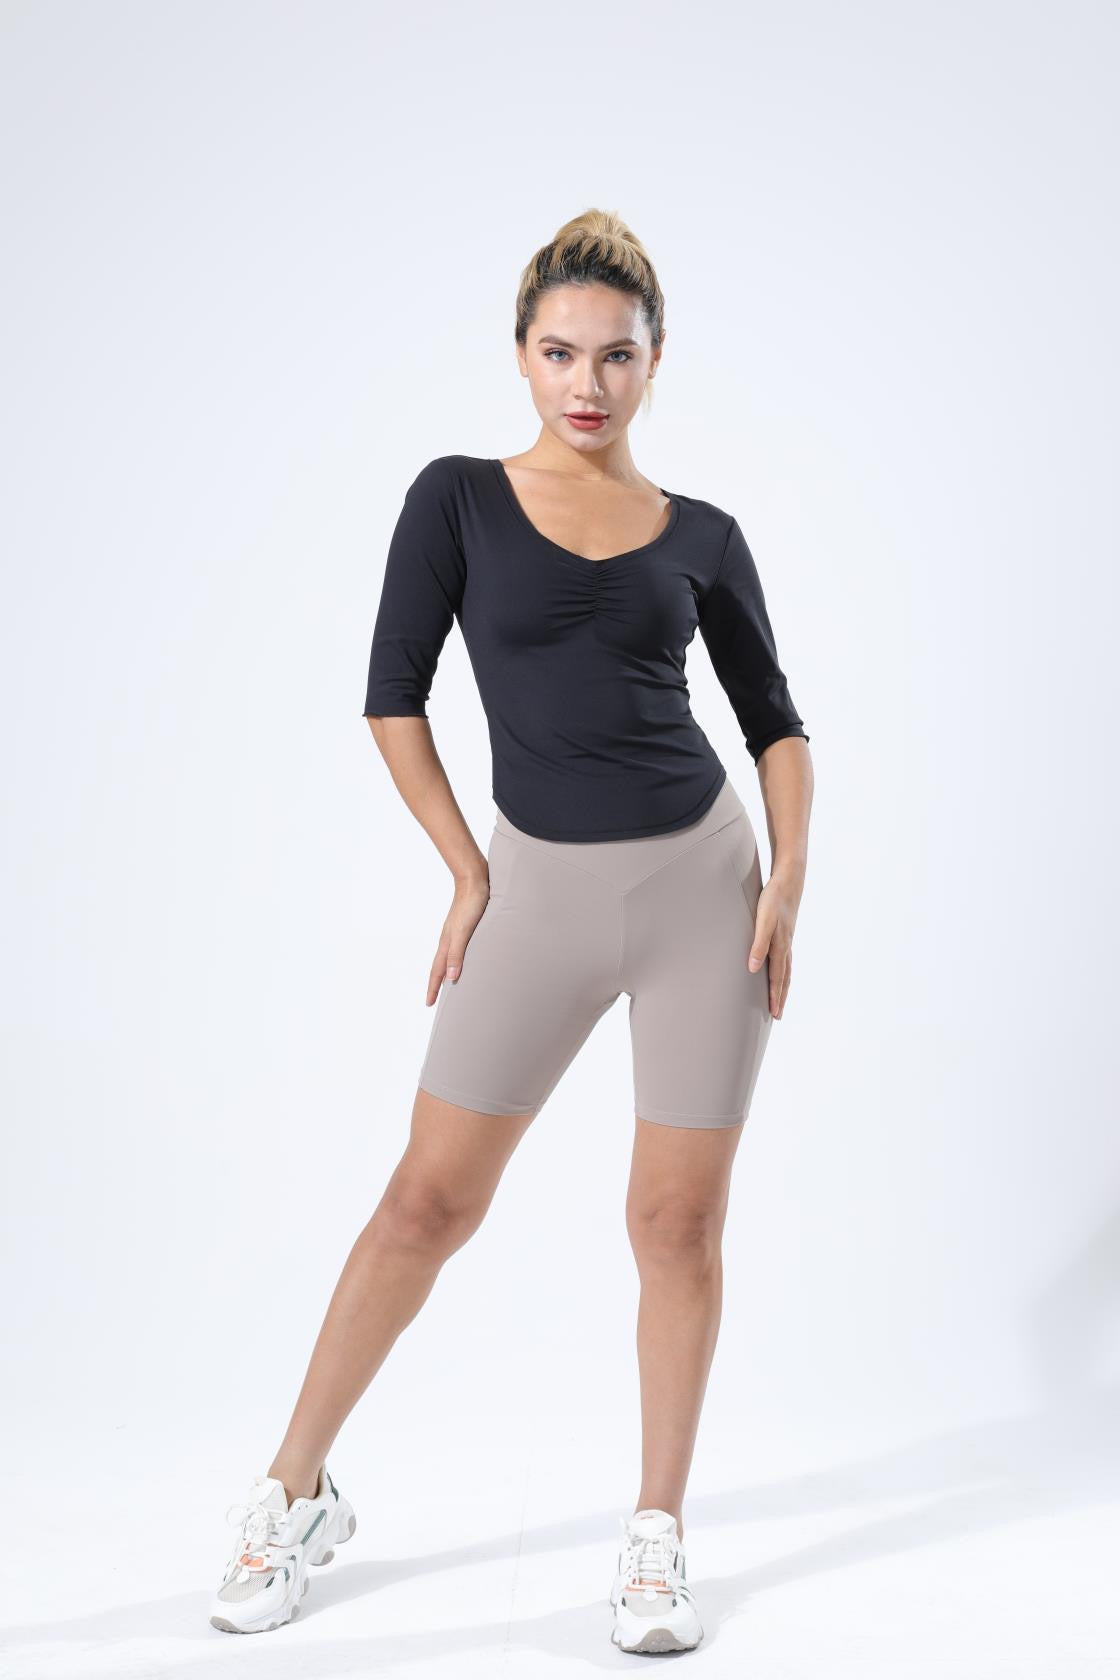 HauteD - DK Victory Mid-Thigh Short